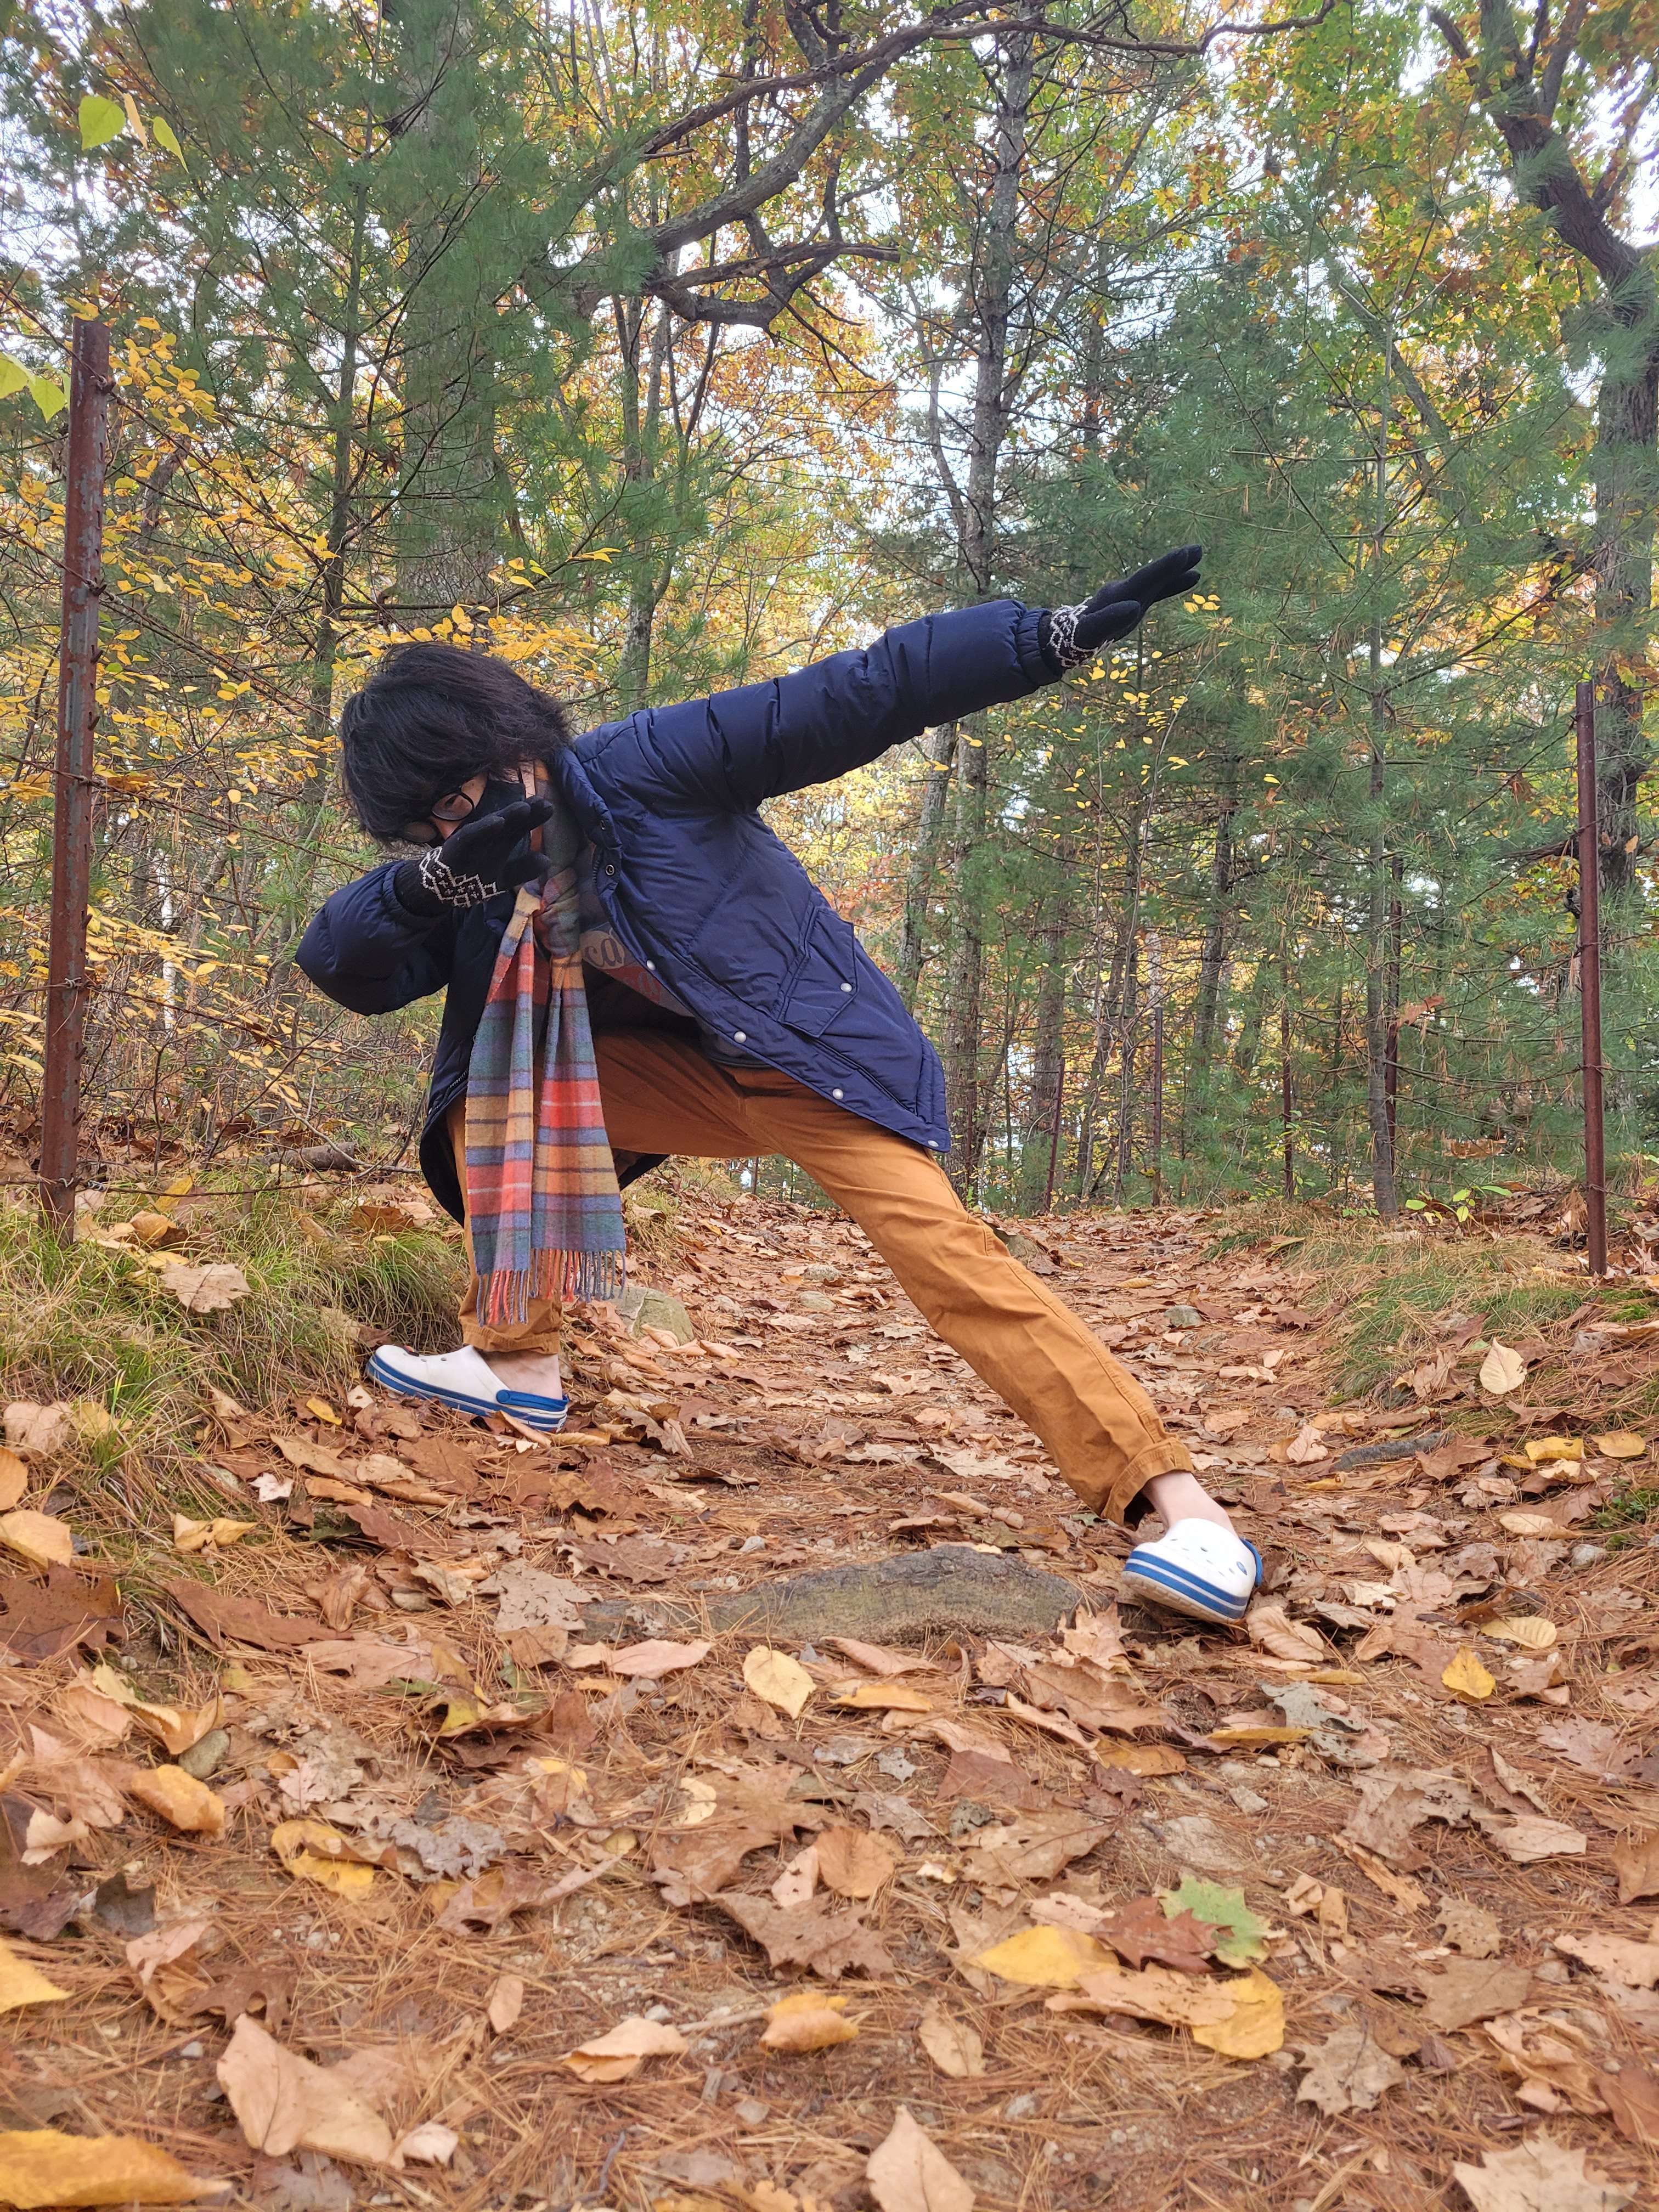 An image of me dabbing on the hiking trail 
									around Walden Pond. I know dabbing is cringe now, 
									but this is post-ironic, ok?